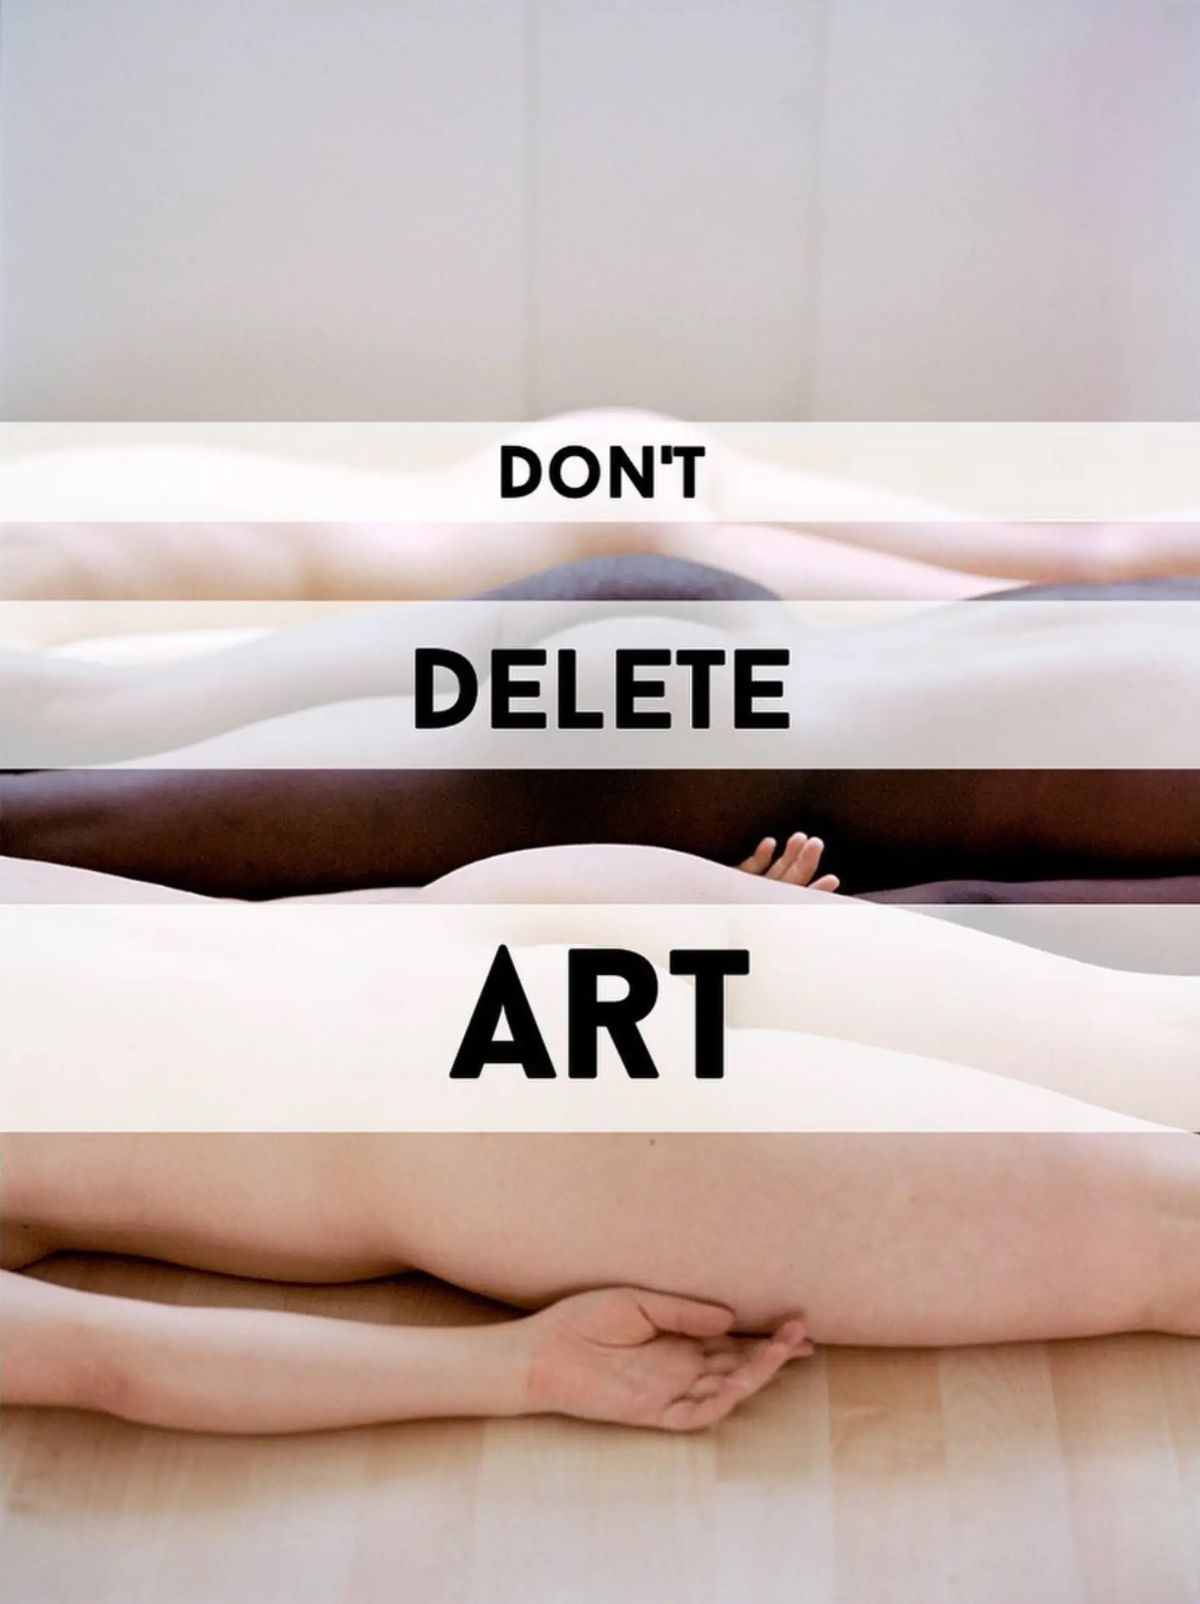 Image from the Don't Delete Art campaign instagram account @dontdelete.art

Original photograph by AdeY, altered for the Don't Delete Art campaign